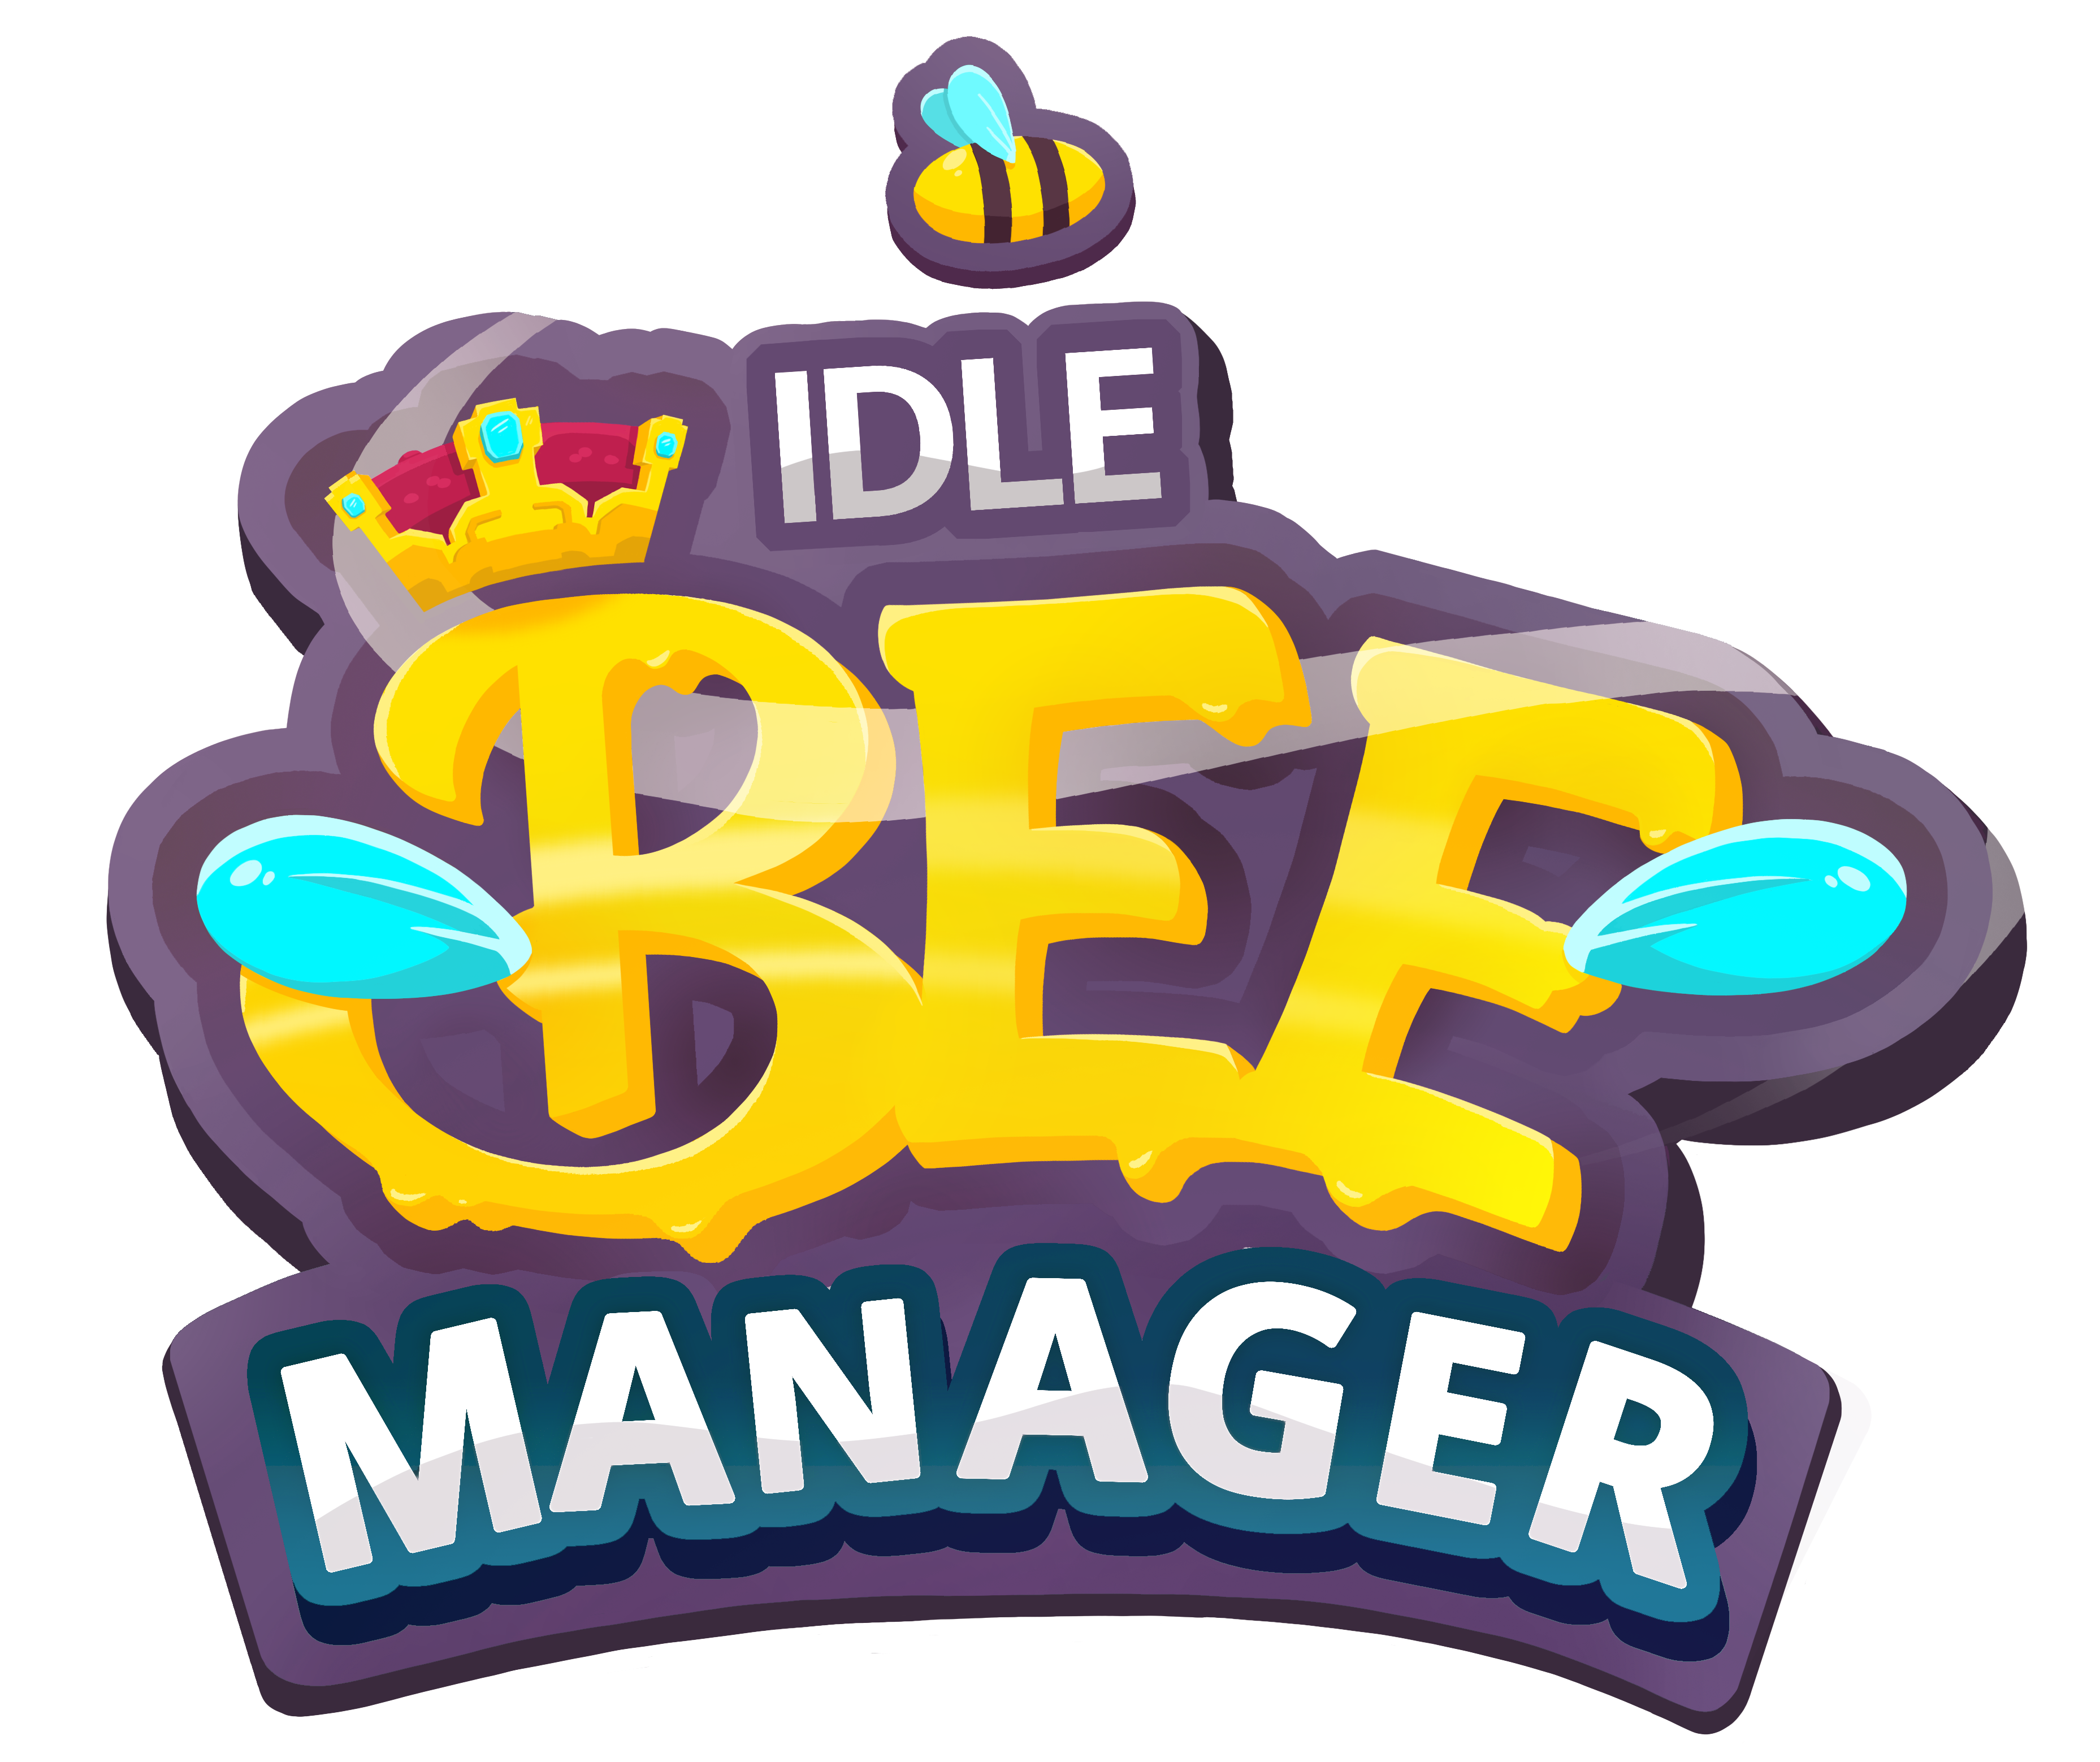 Idle Bee Manager Logo